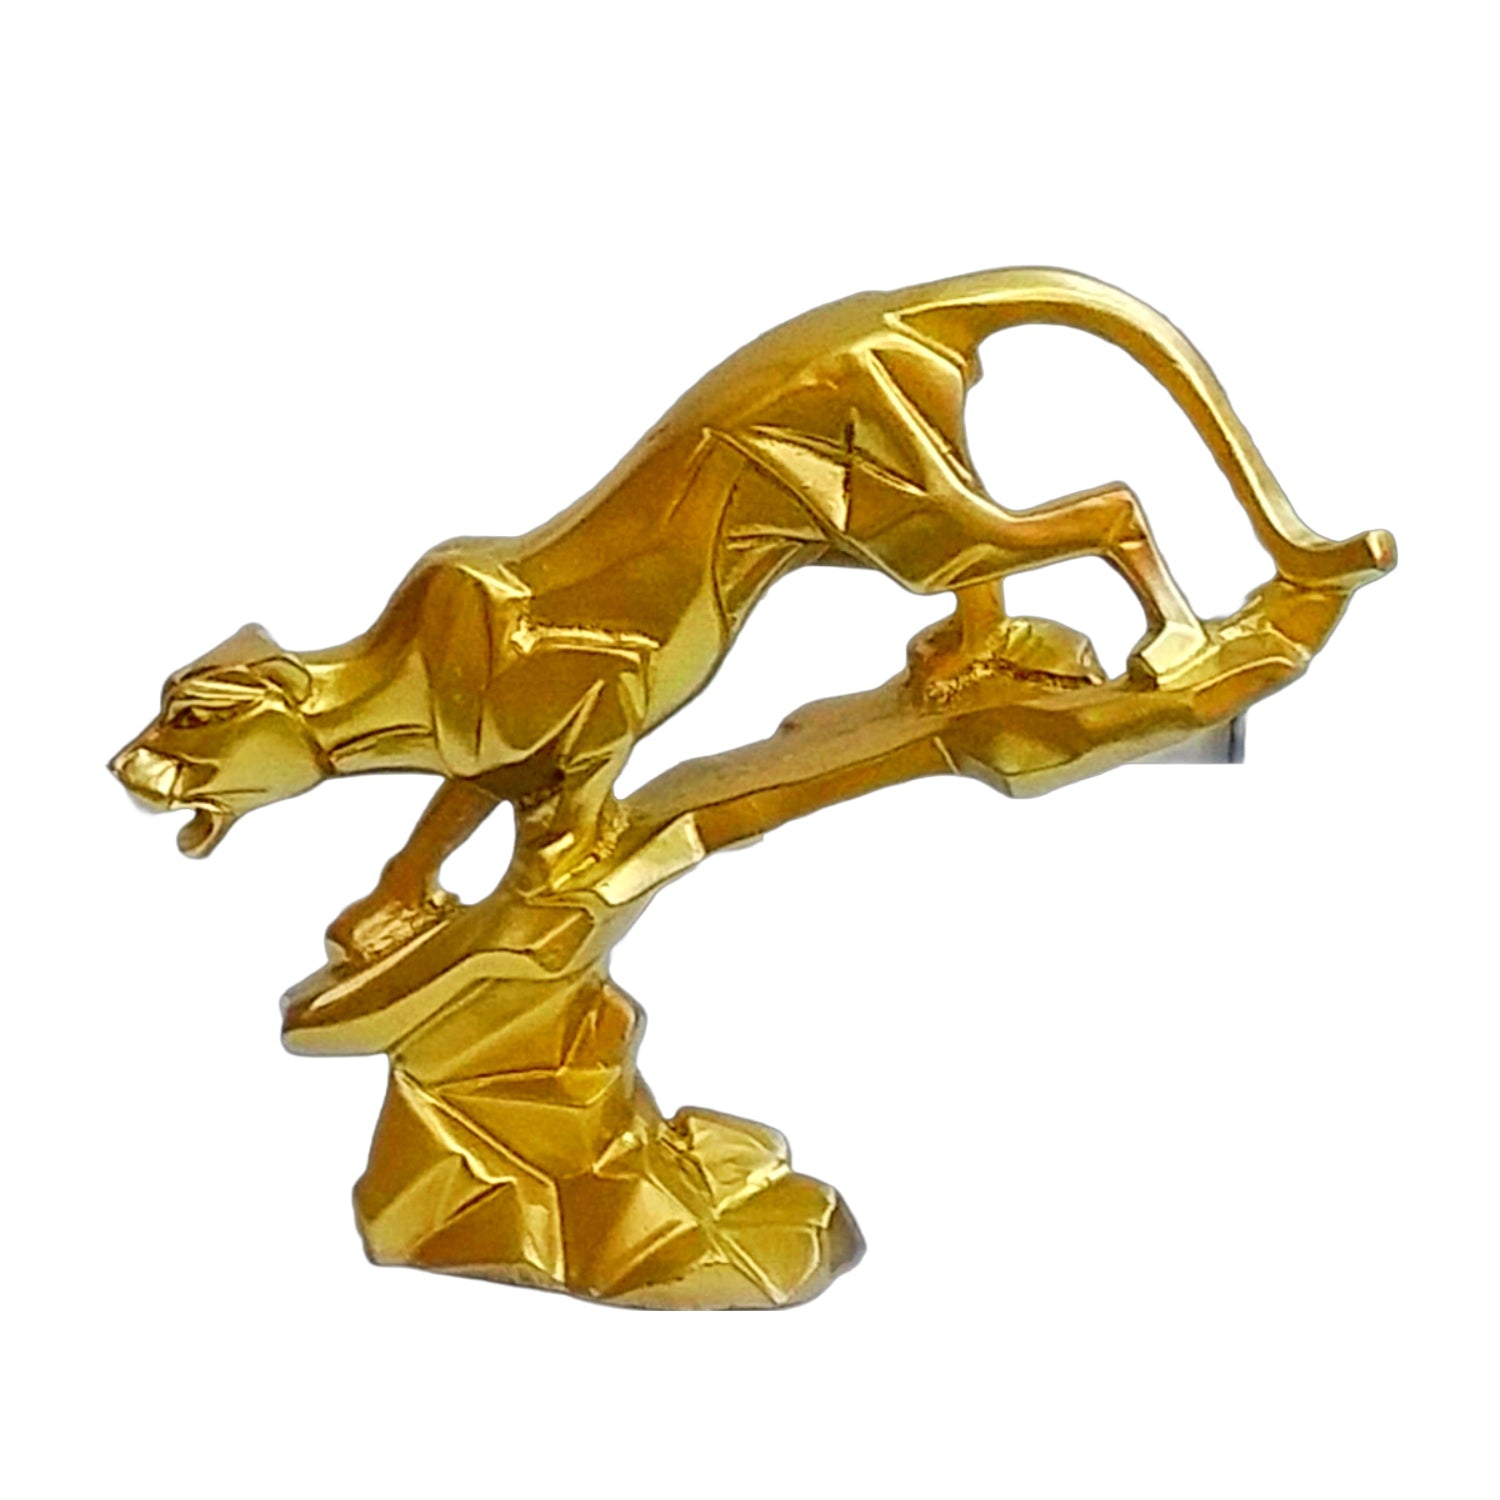 Statue ALiLA Elegant and Majestic Panther/Jaguar Geometrical Statue - Feng Shui Figurine - Enhance Your Home Interior Decor with This Showpiece Decorative Handicraft Item, 8 inches Statue